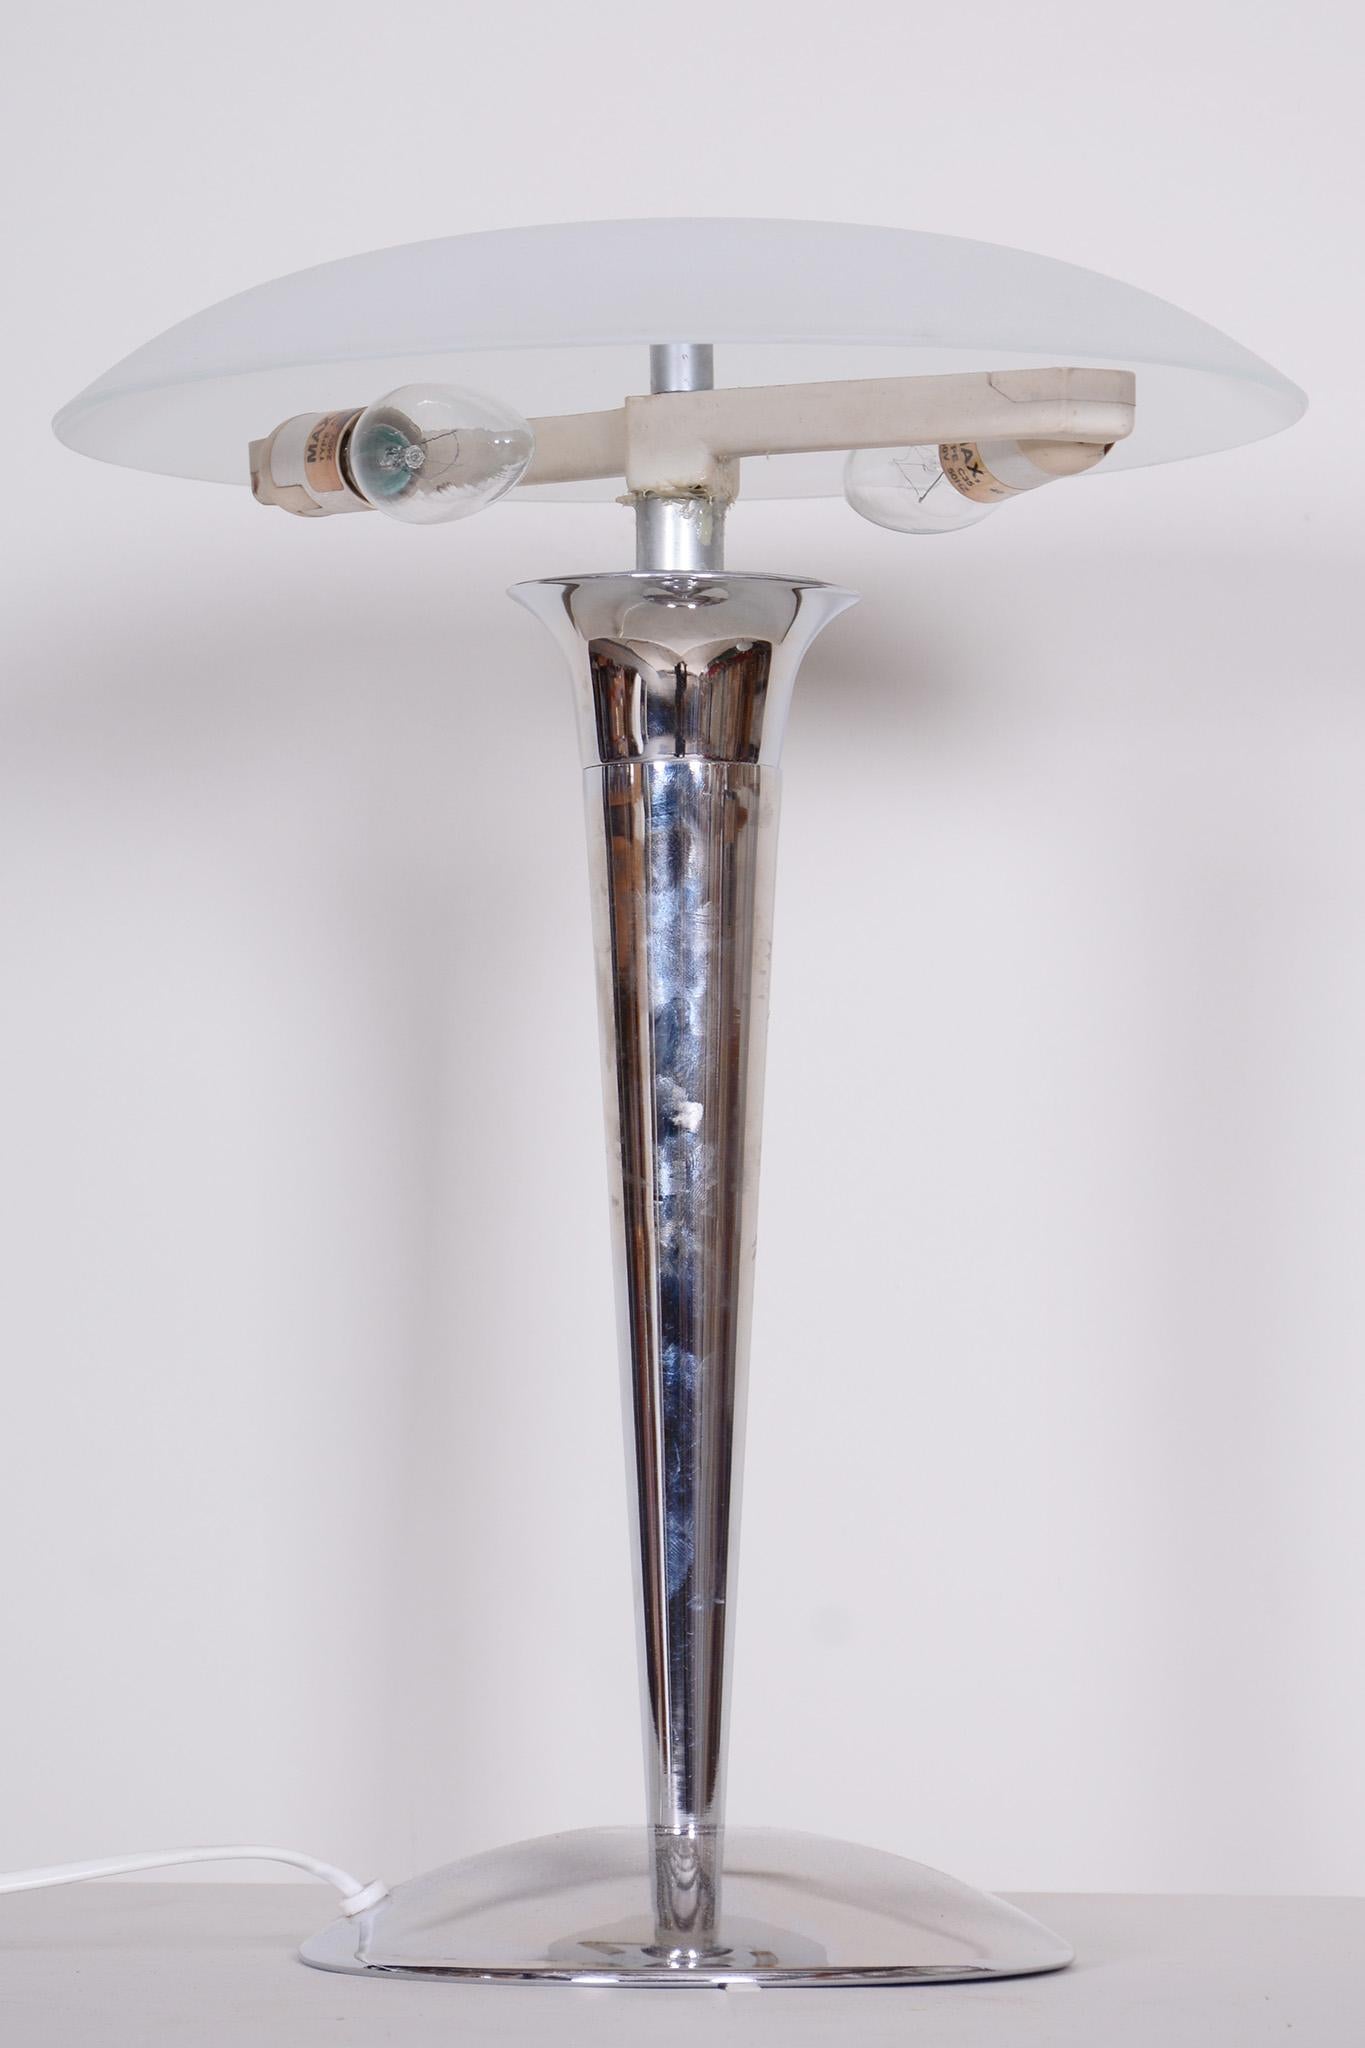 Mid-20th Century Pair of Midcentury Table Lamps, Chrome-Plated Steel, Milk Glass, Germany, 1950s For Sale